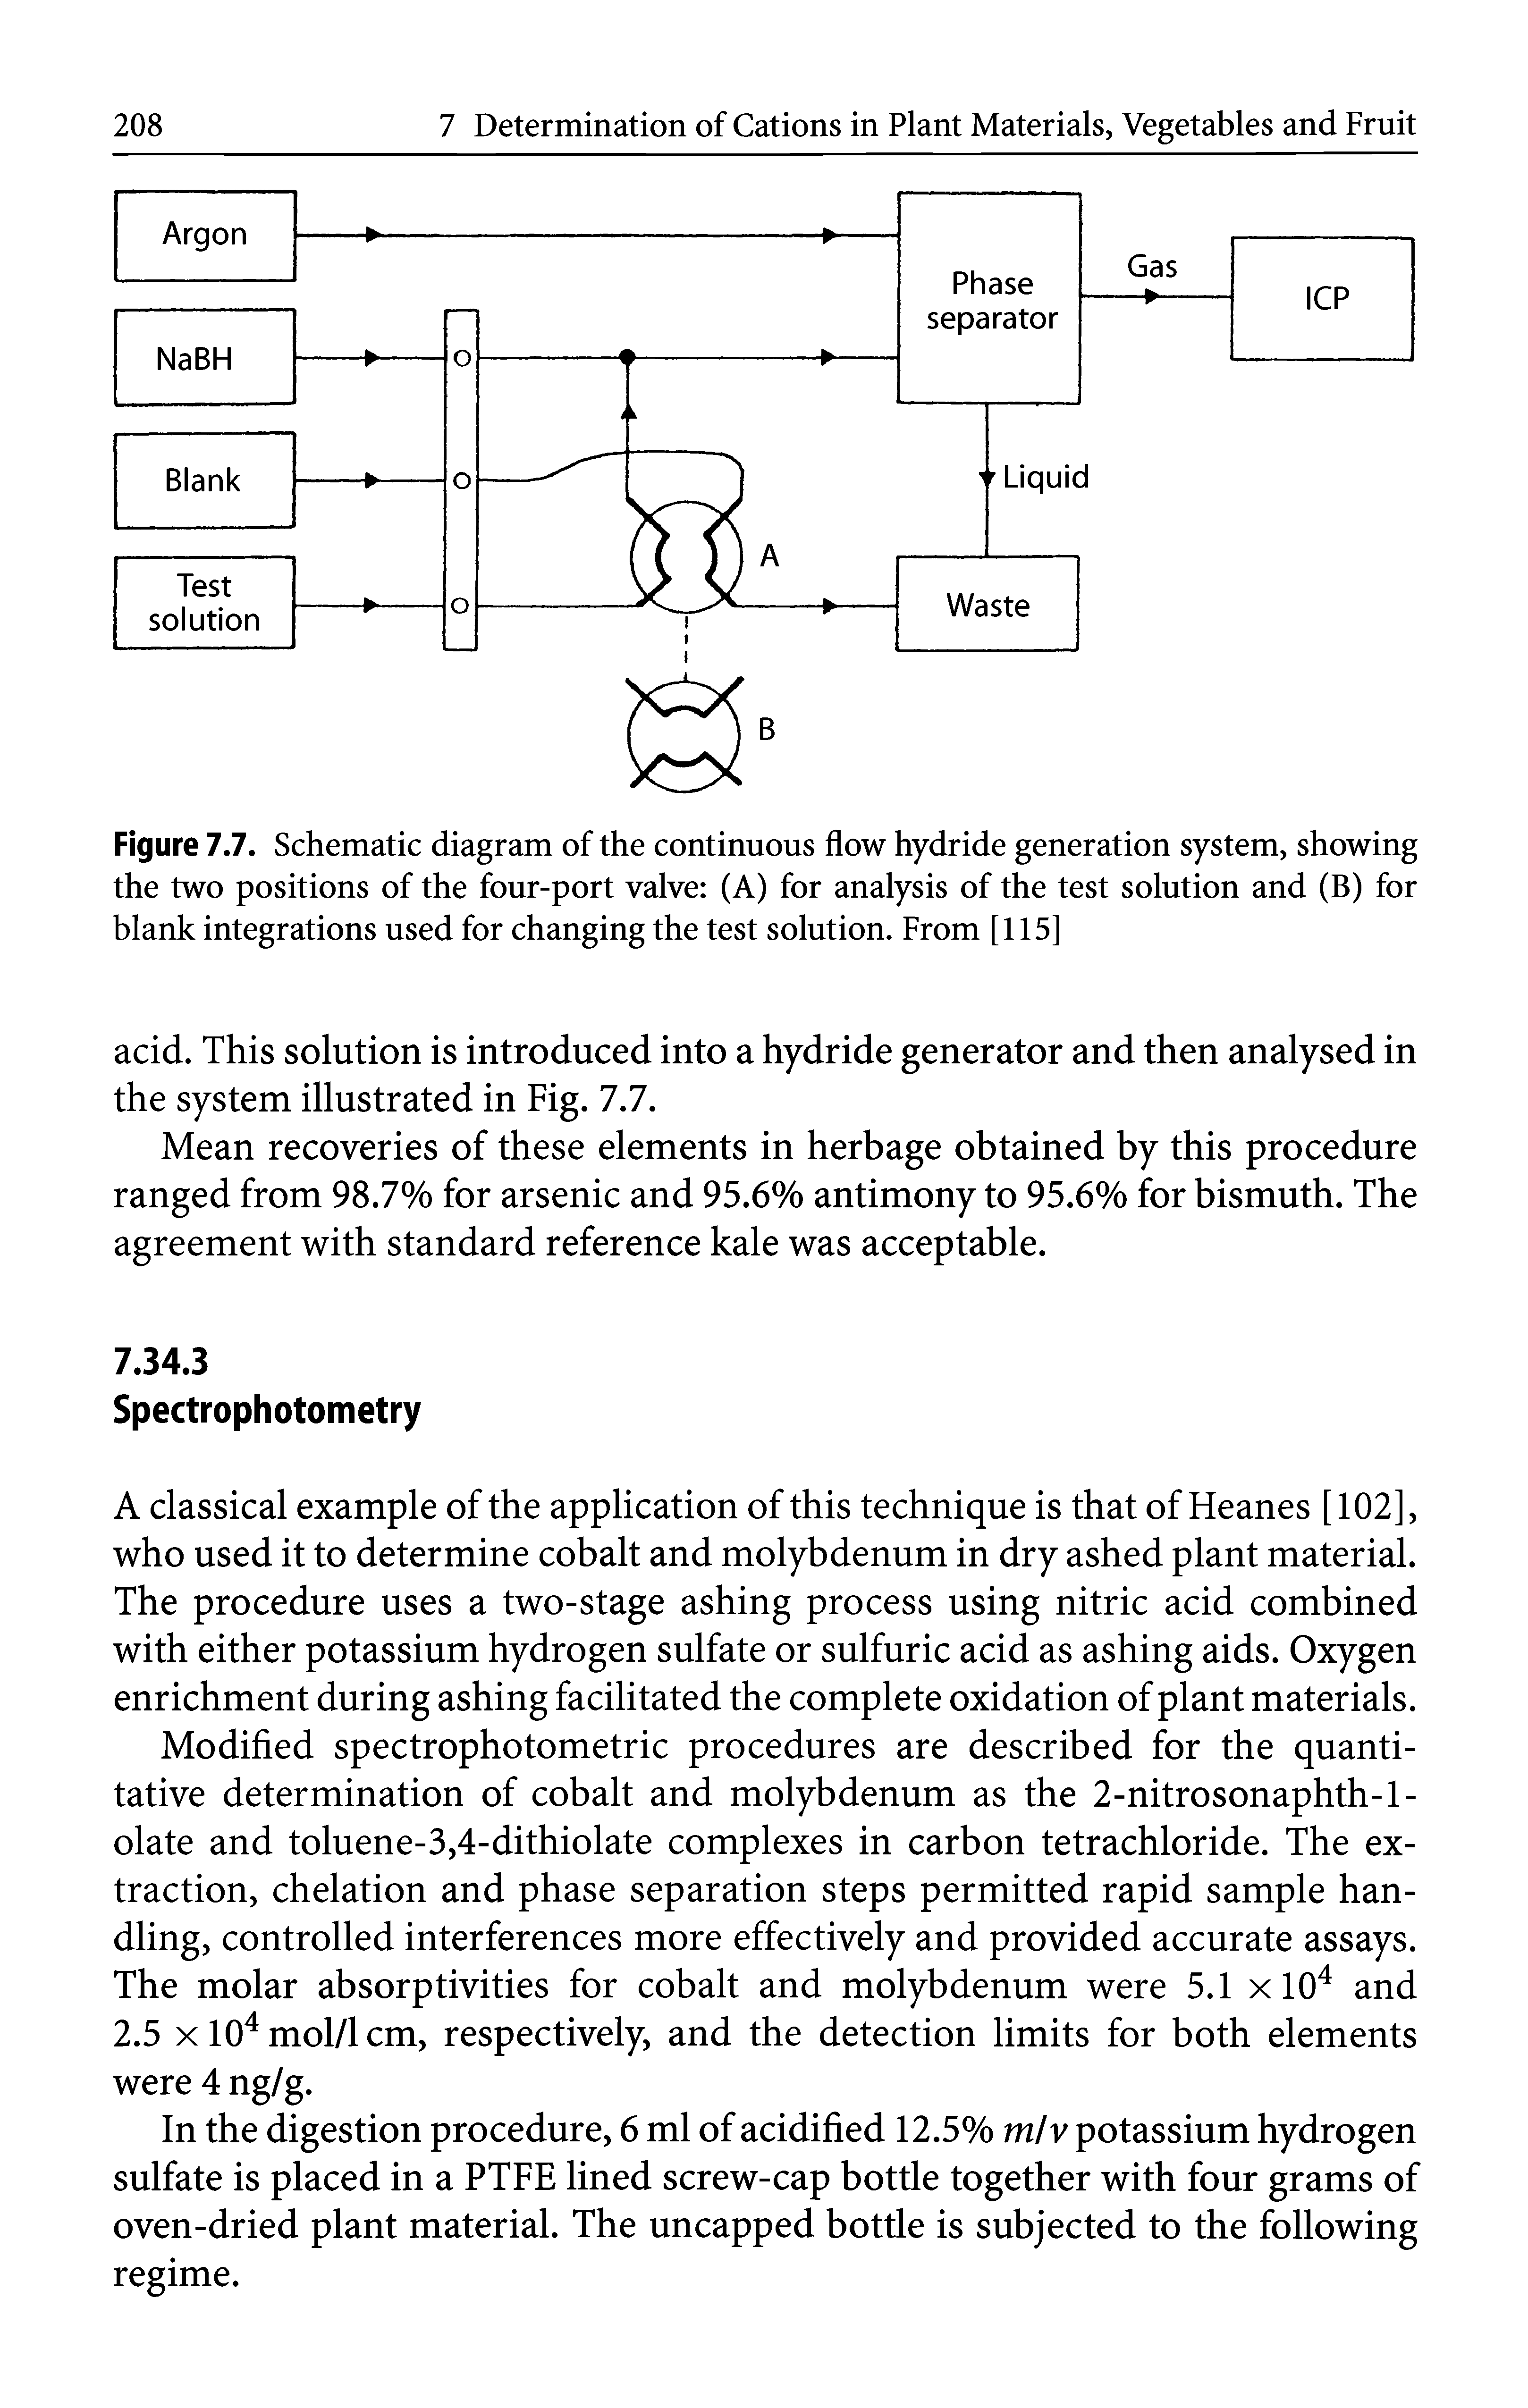 Figure 7.7. Schematic diagram of the continuous flow hydride generation system, showing the two positions of the four-port valve (A) for analysis of the test solution and (B) for blank integrations used for changing the test solution. From [115]...